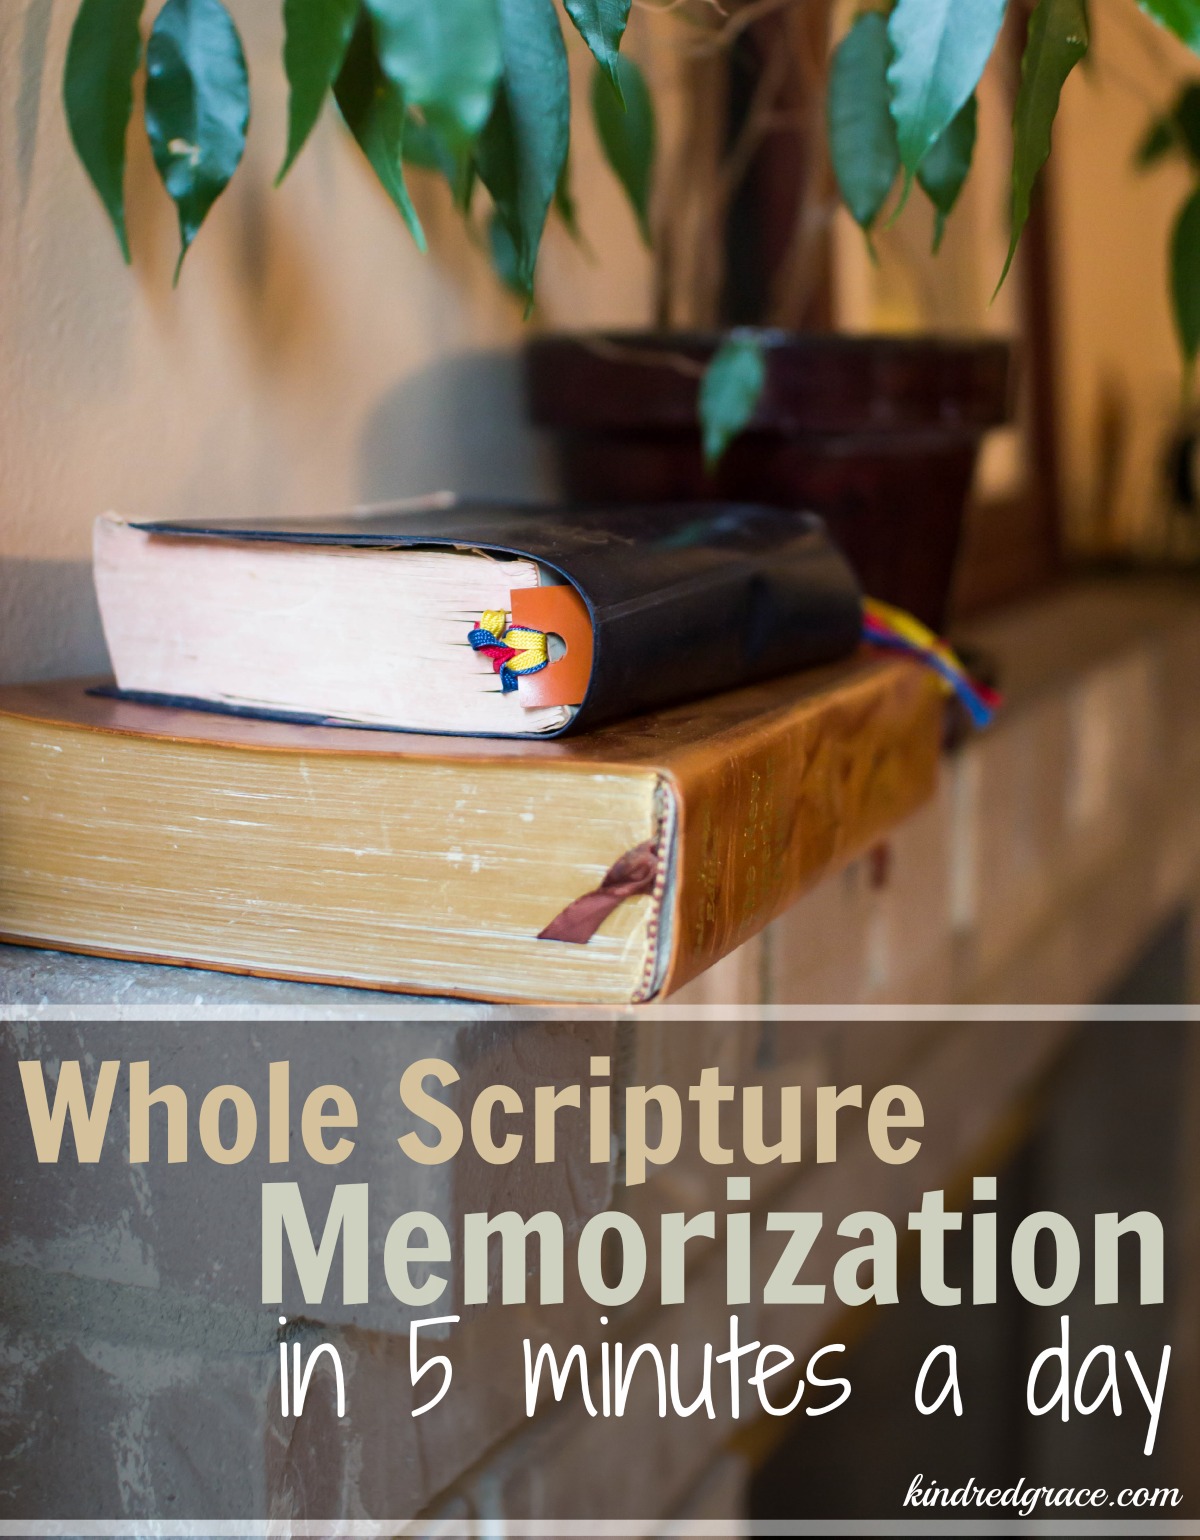 Whole Scripture Memorization (in 5 minutes a day)